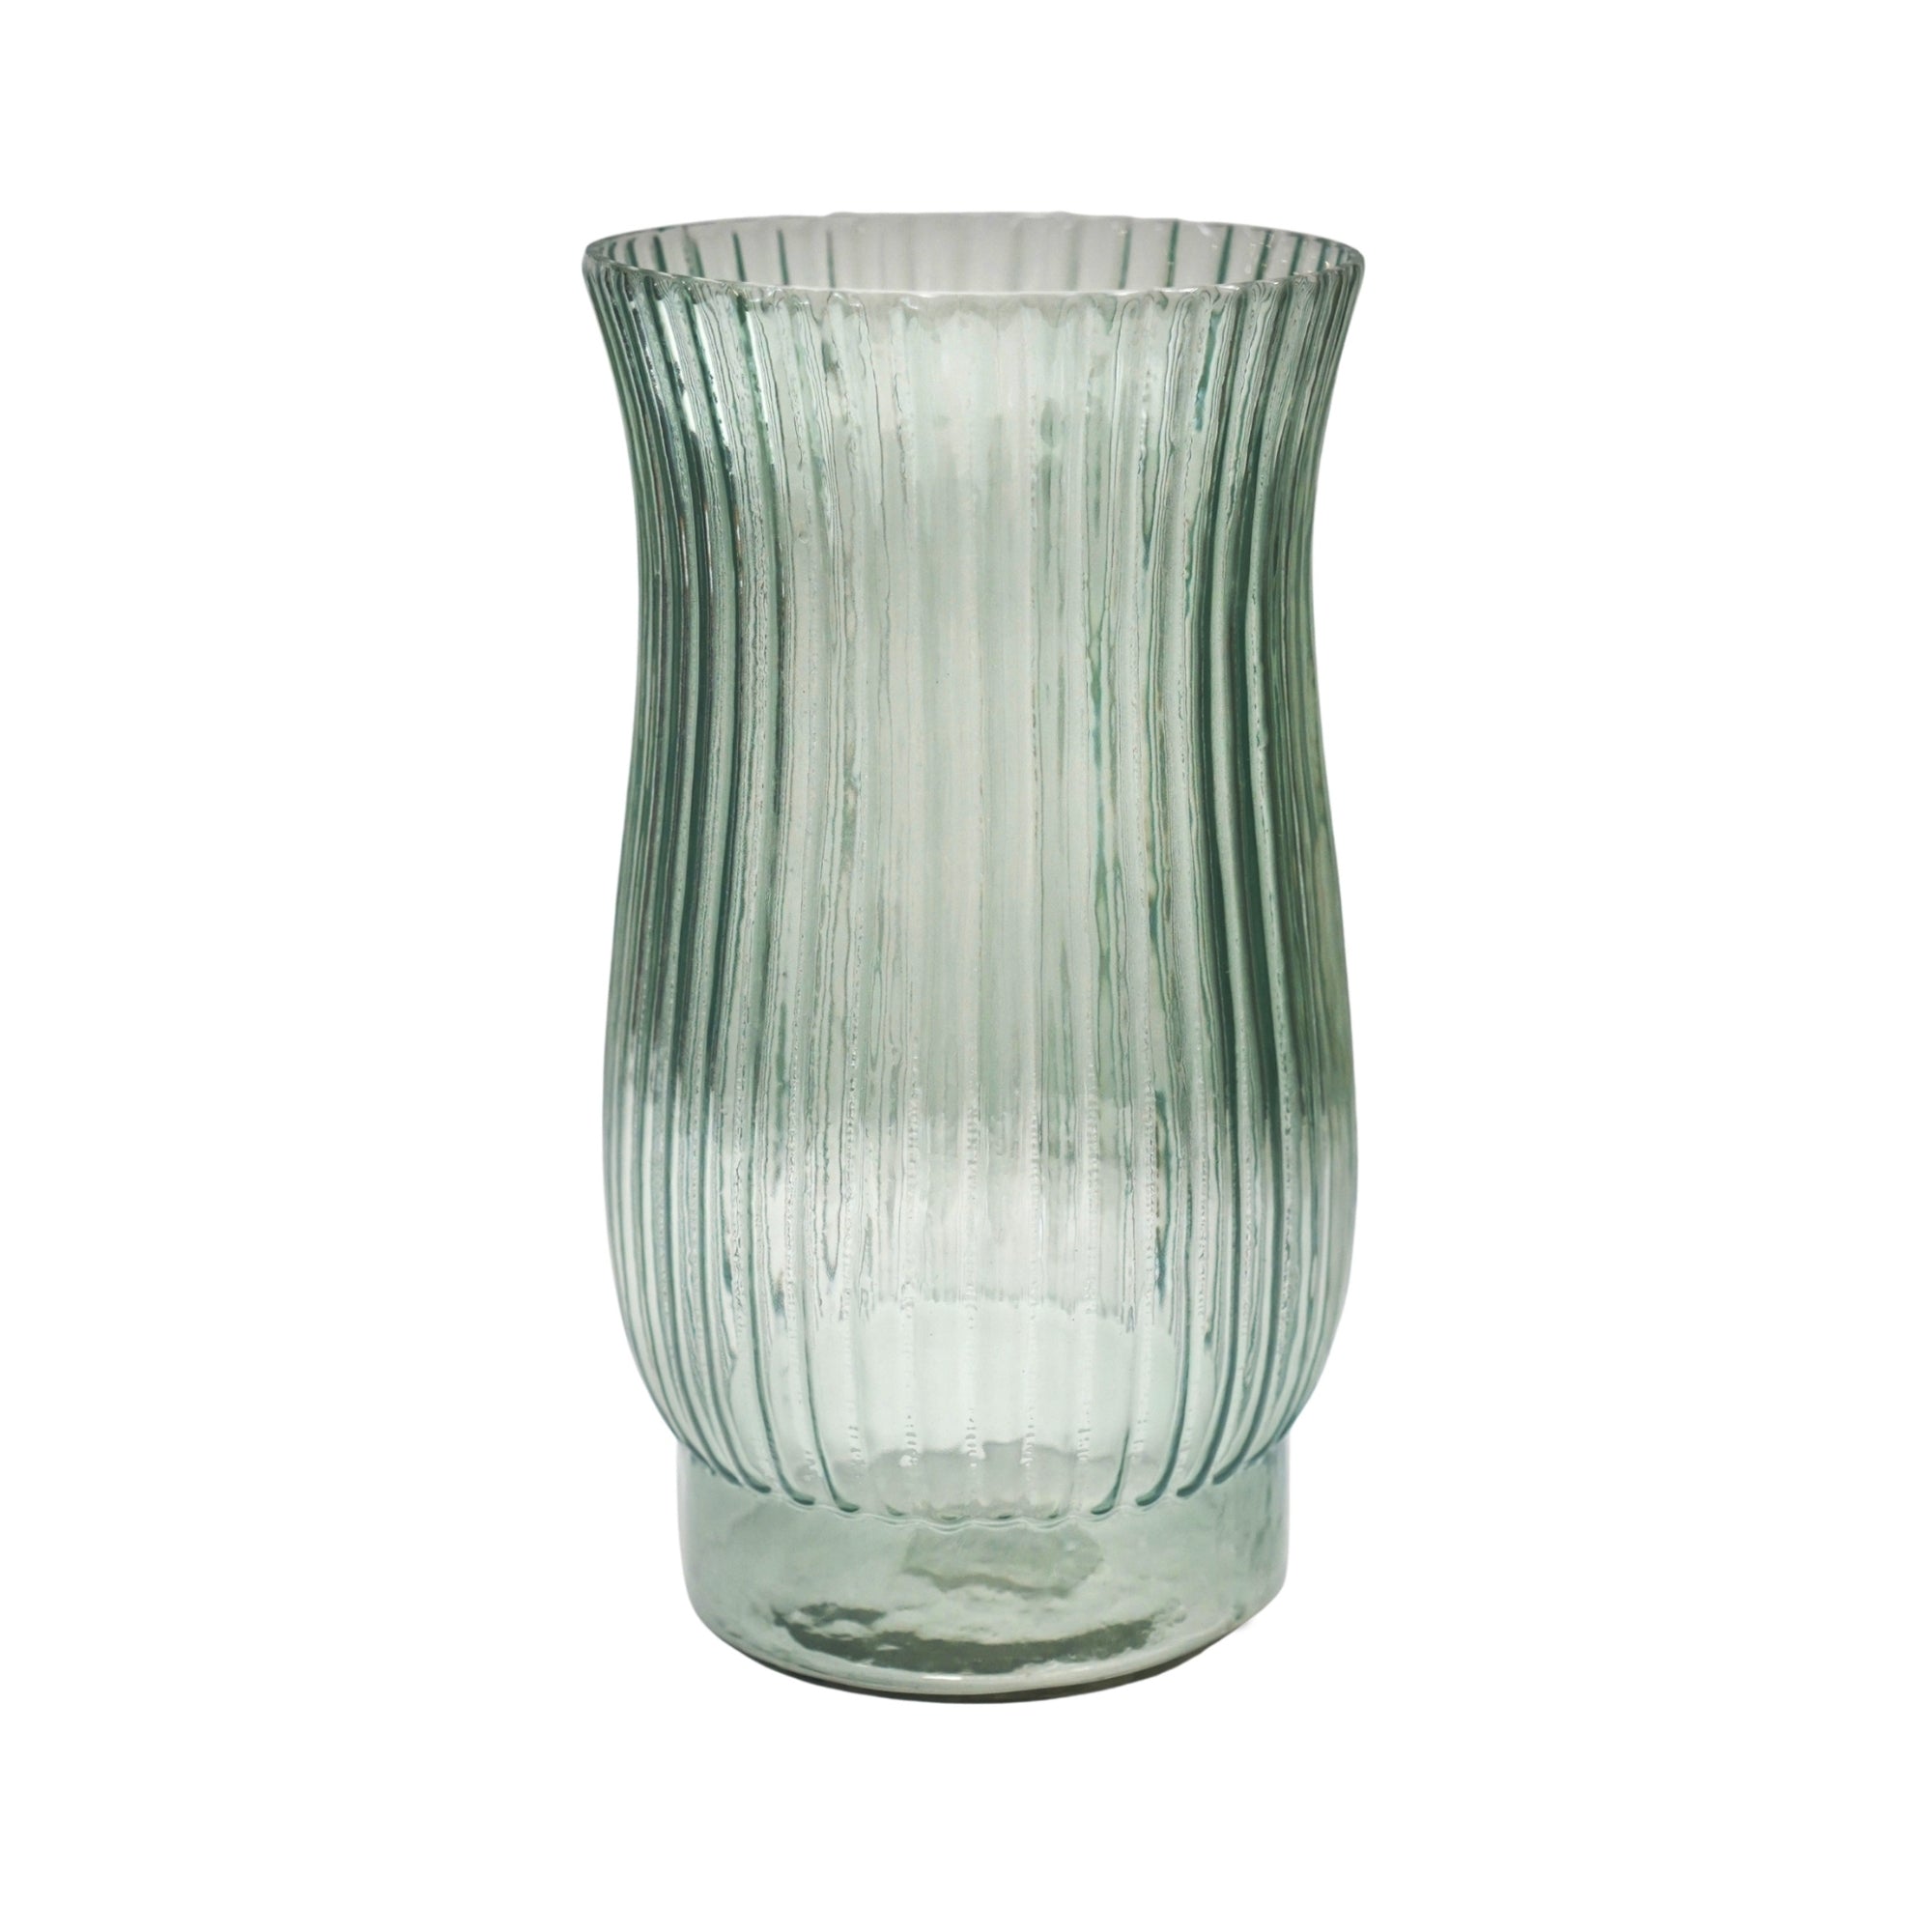 Airlie Ribbed Vase Apricot